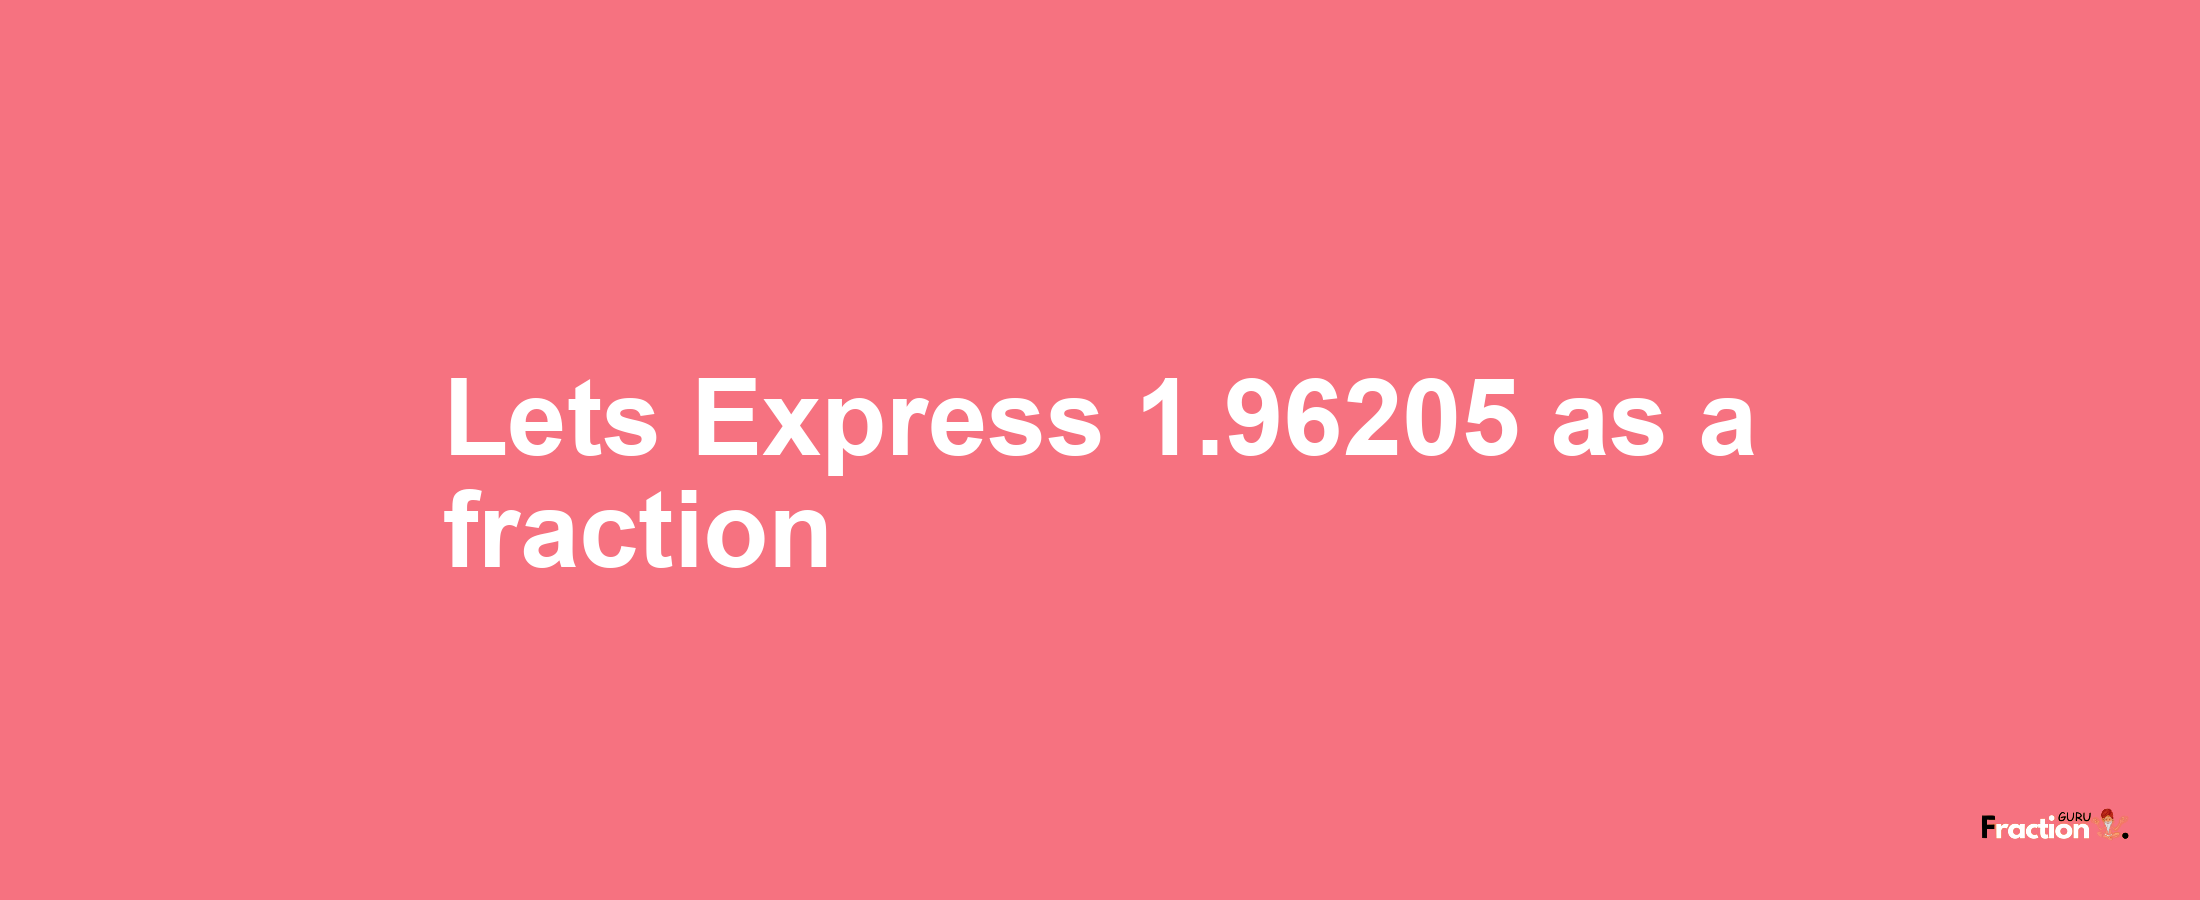 Lets Express 1.96205 as afraction